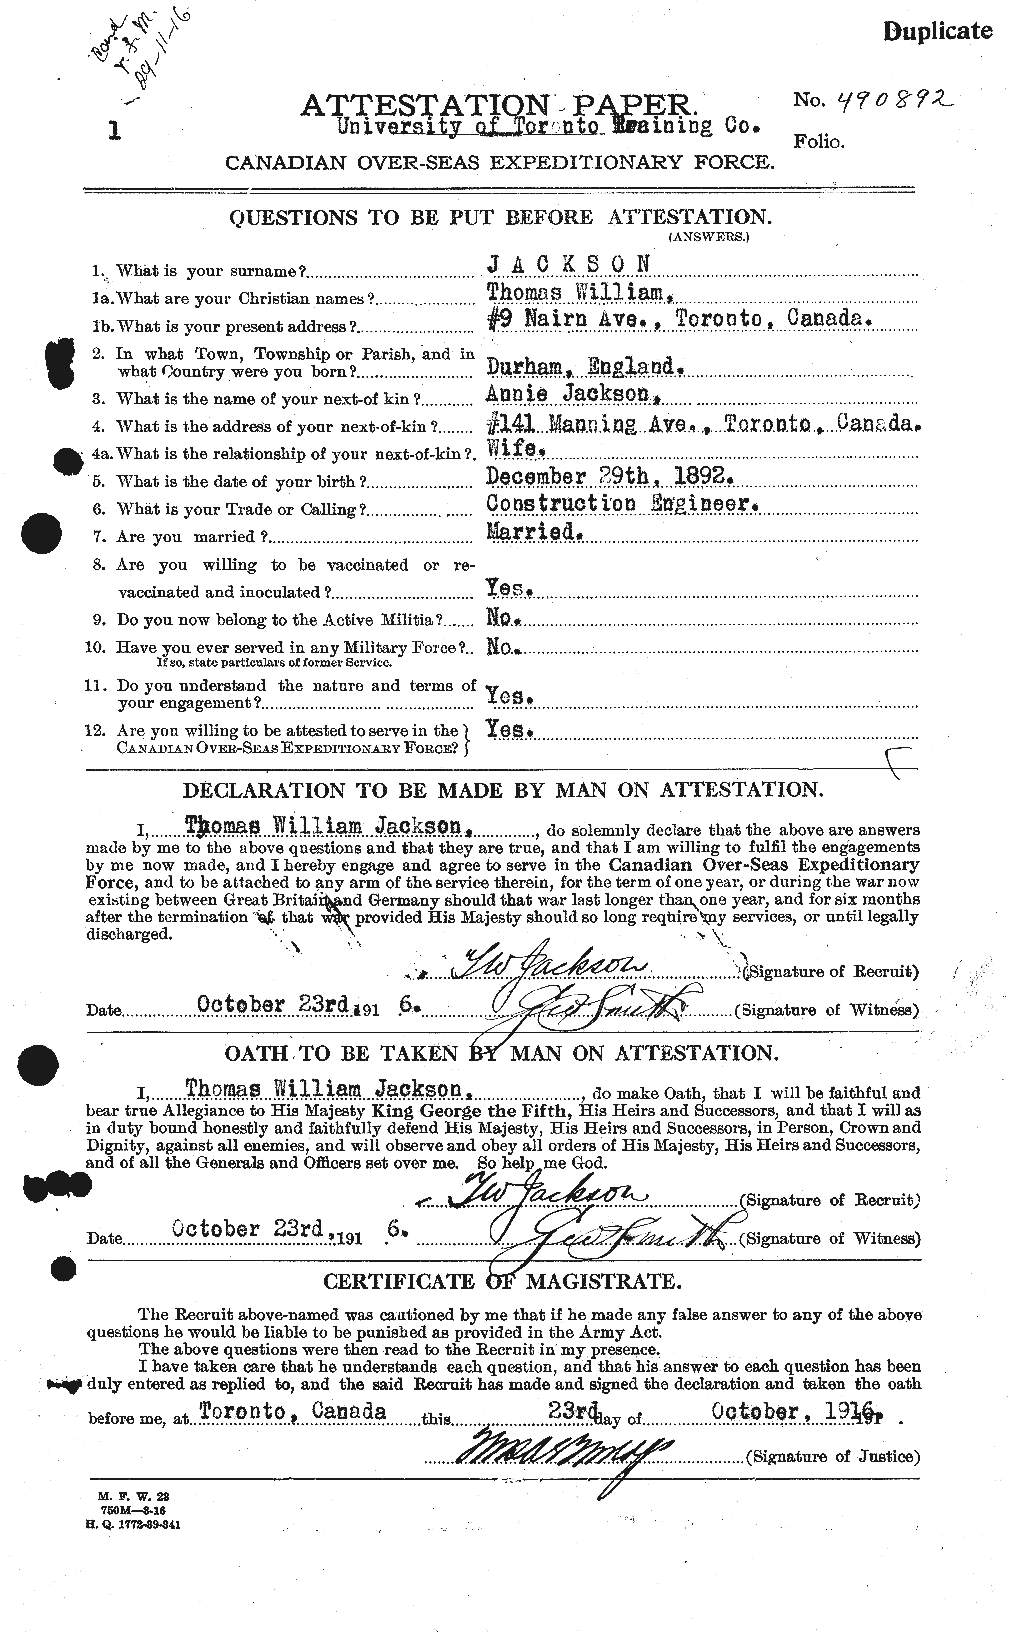 Personnel Records of the First World War - CEF 412353a